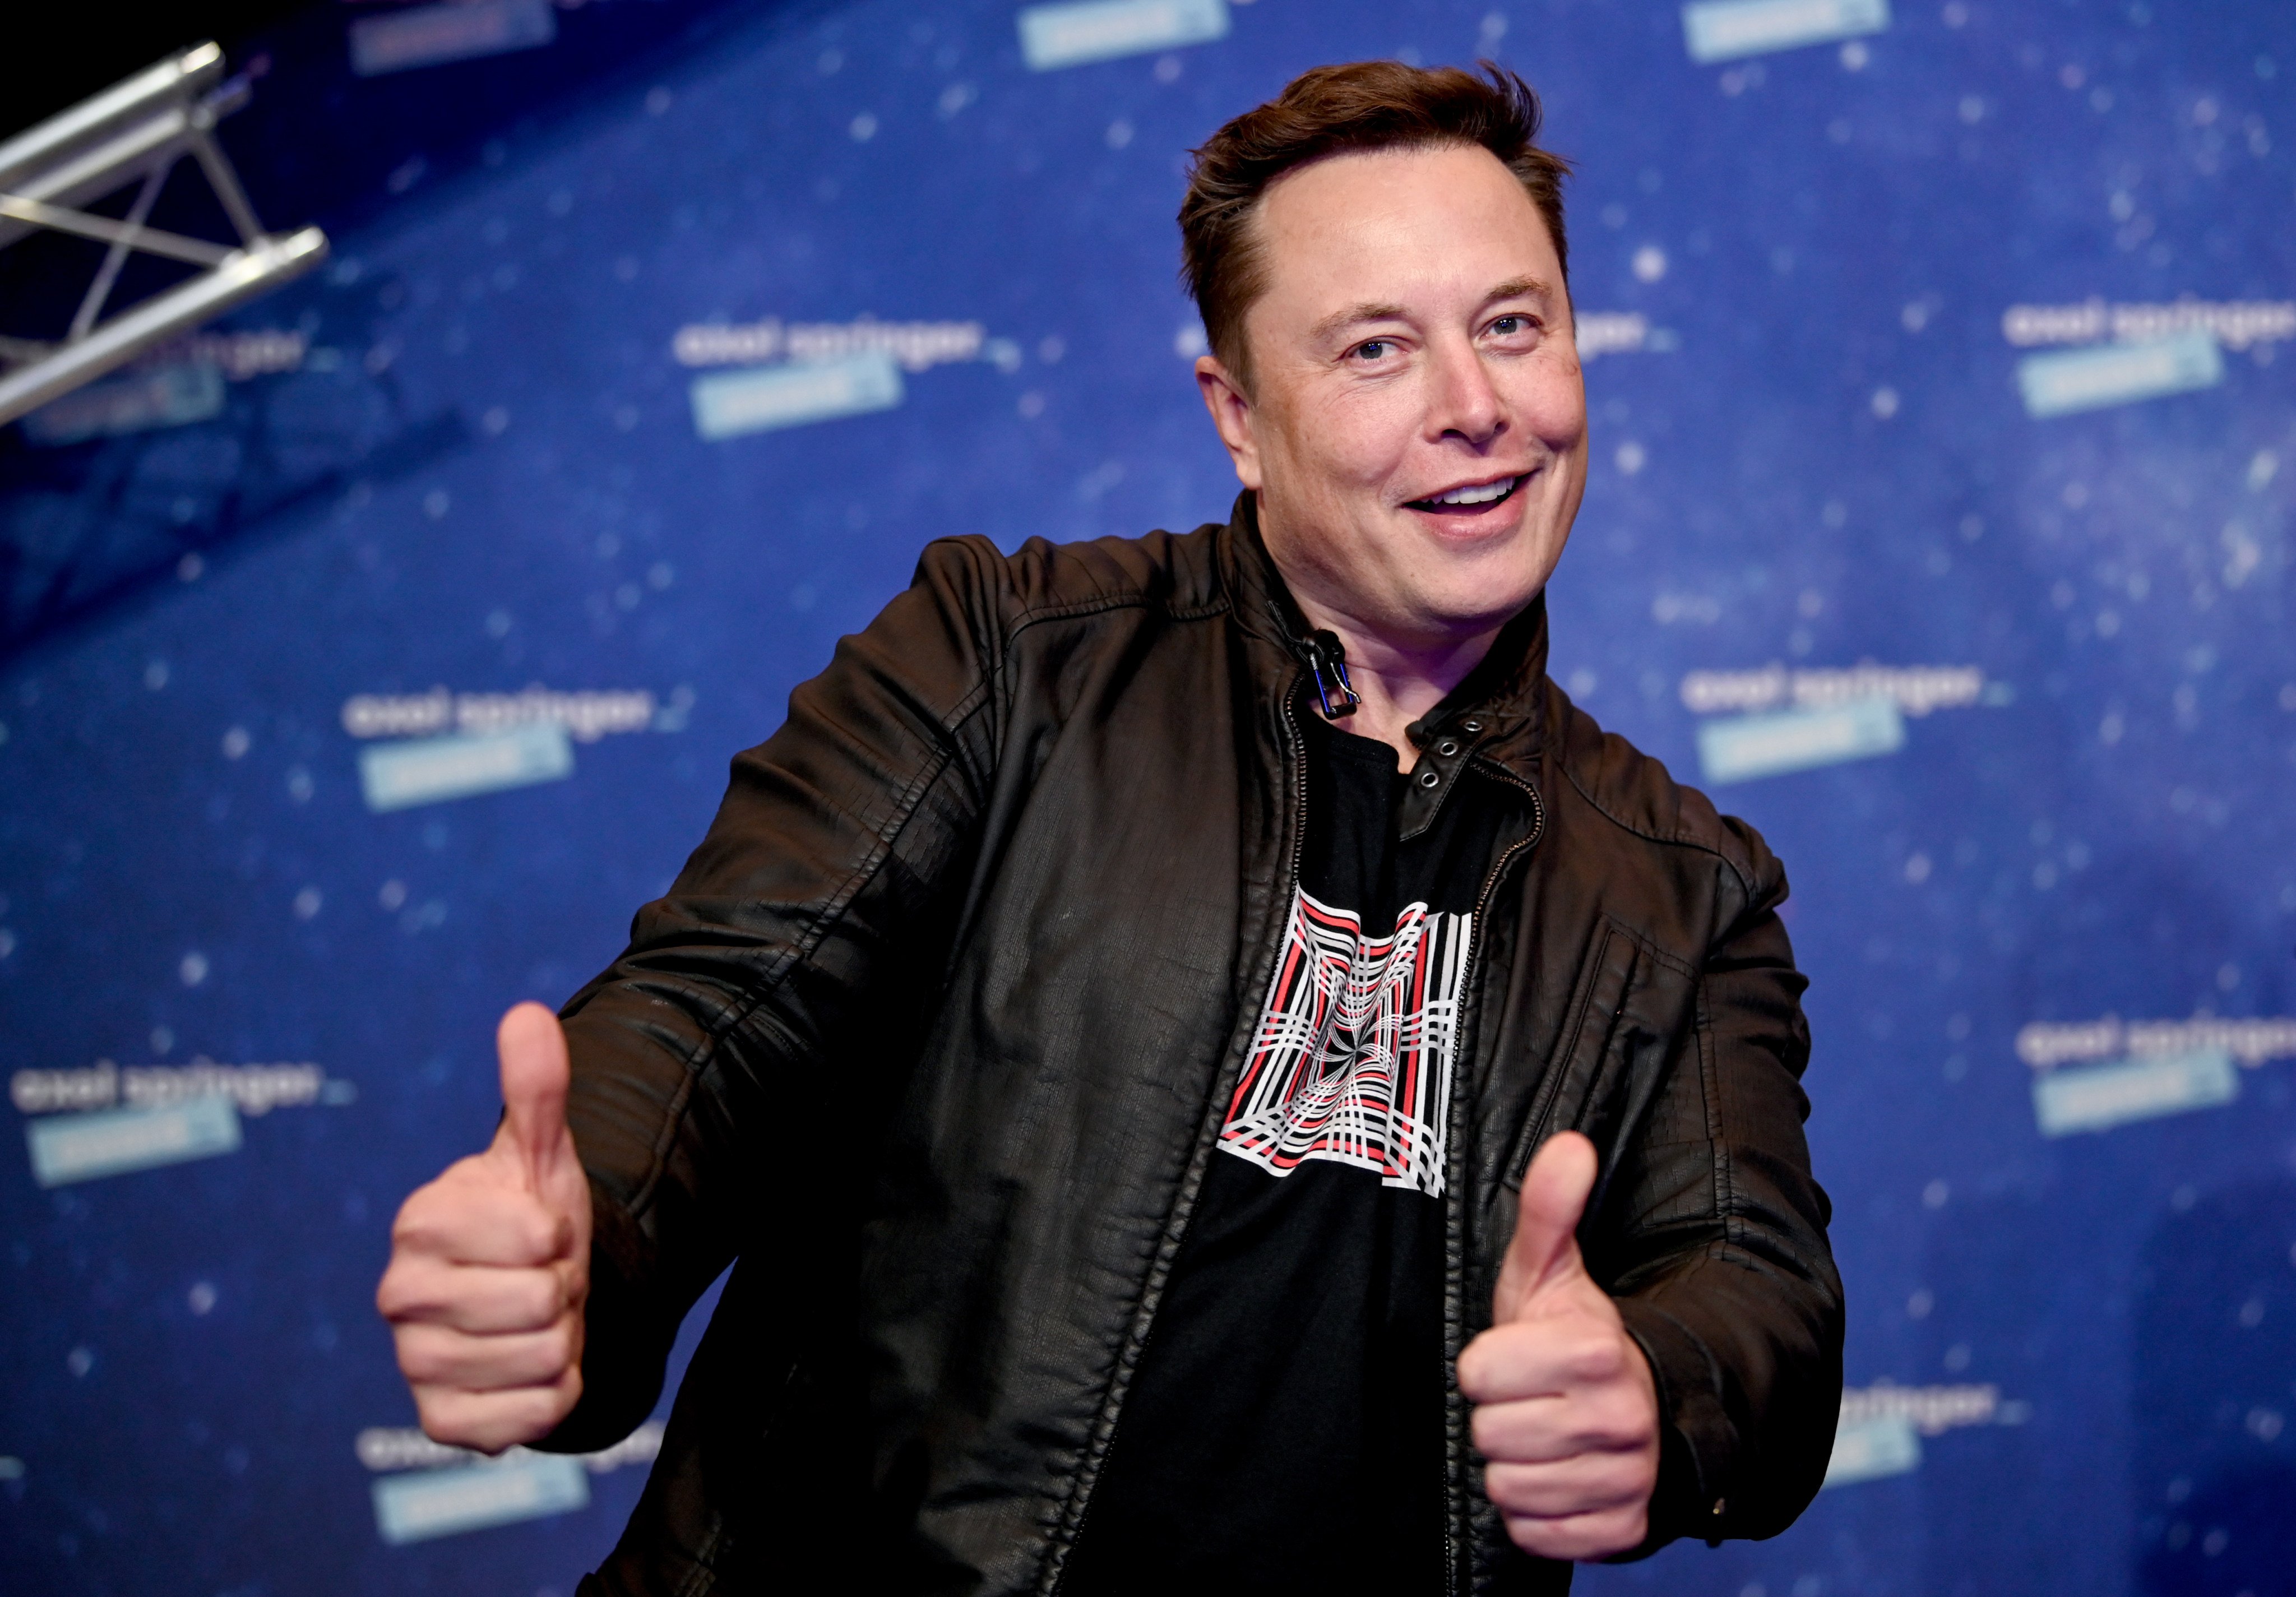 Elon Musk, founder of SpaceX and Tesla, has billions to spend – so what are his passions? Photo: DPA